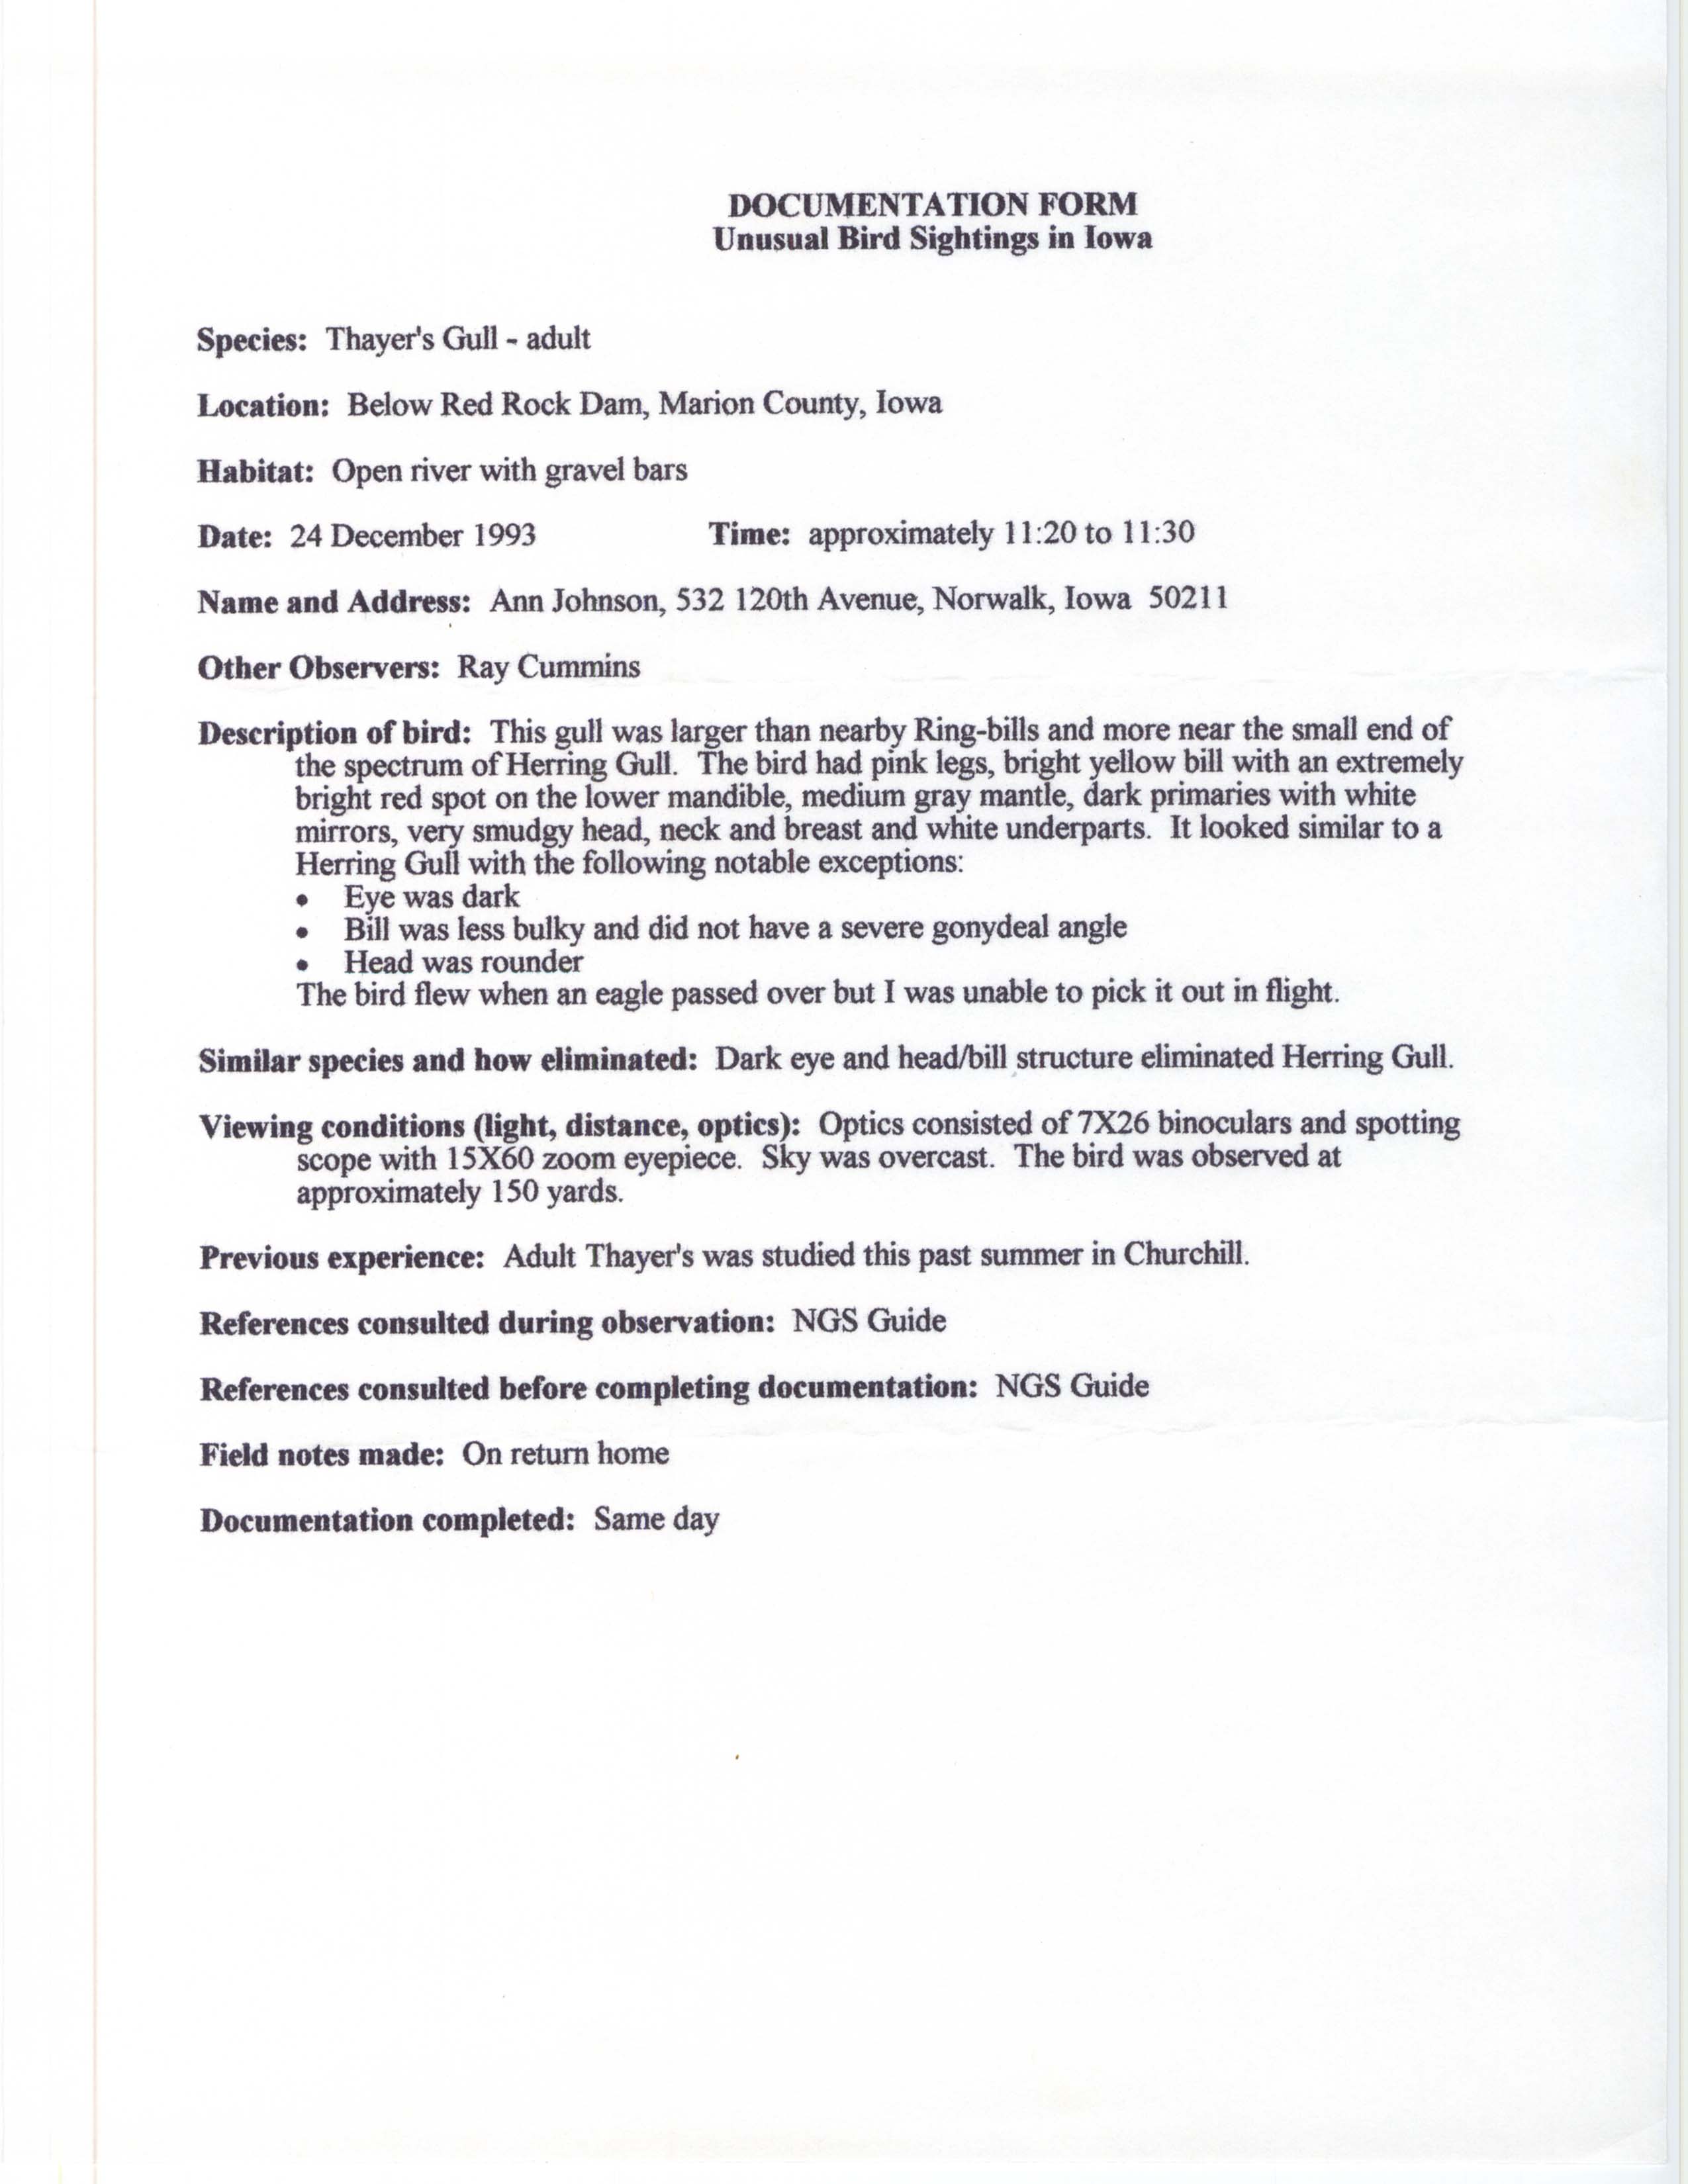 Rare bird documentation form for Thayer's Gull at Red Rock Dam, 1993